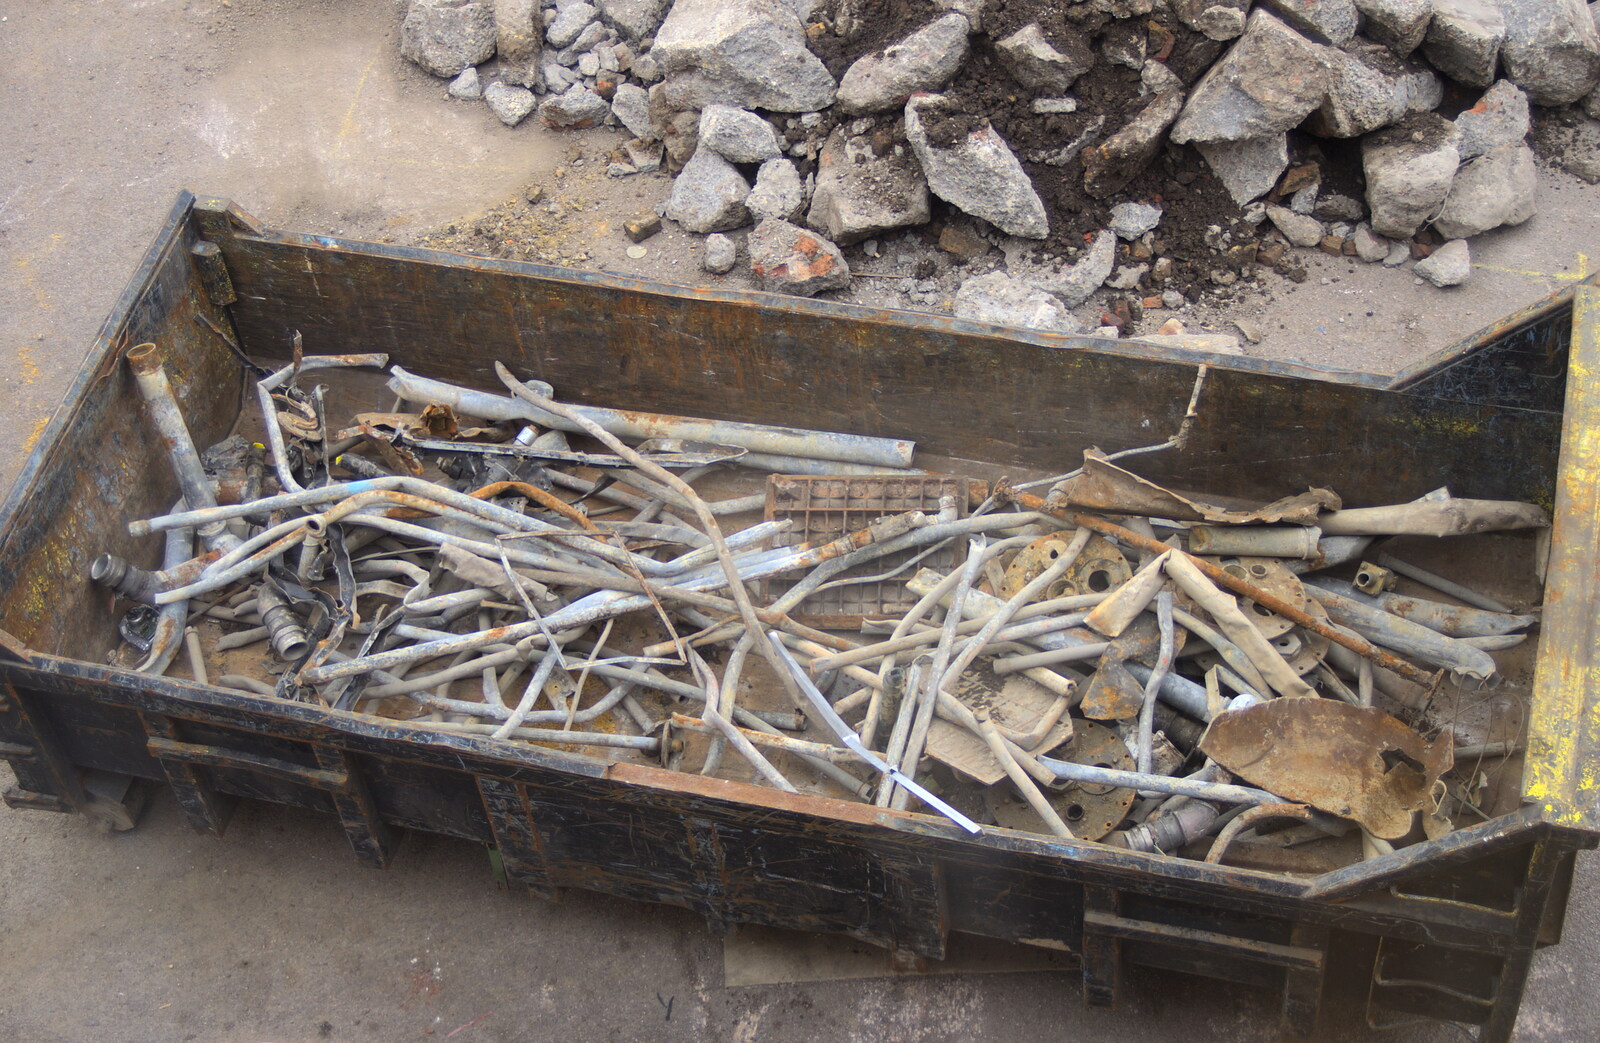 A skip is full of old fuel pipes from Tangmere at Norwich Station, Norwich, Norfolk - 25th May 2013